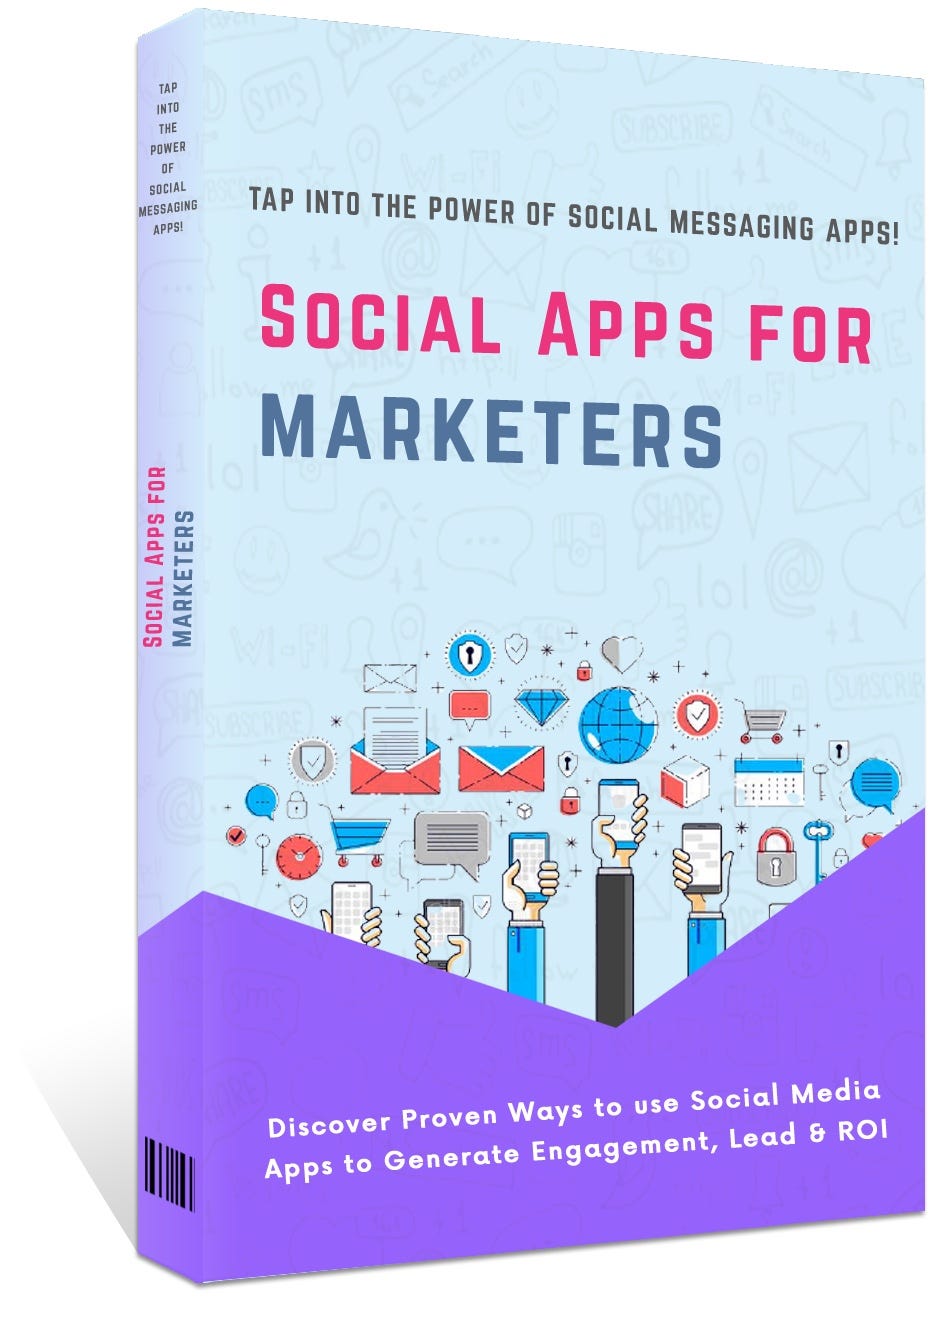 Social apps and marketers Kickstart Your Own Info-Selling Business TodayWith This Brand New PLR On…